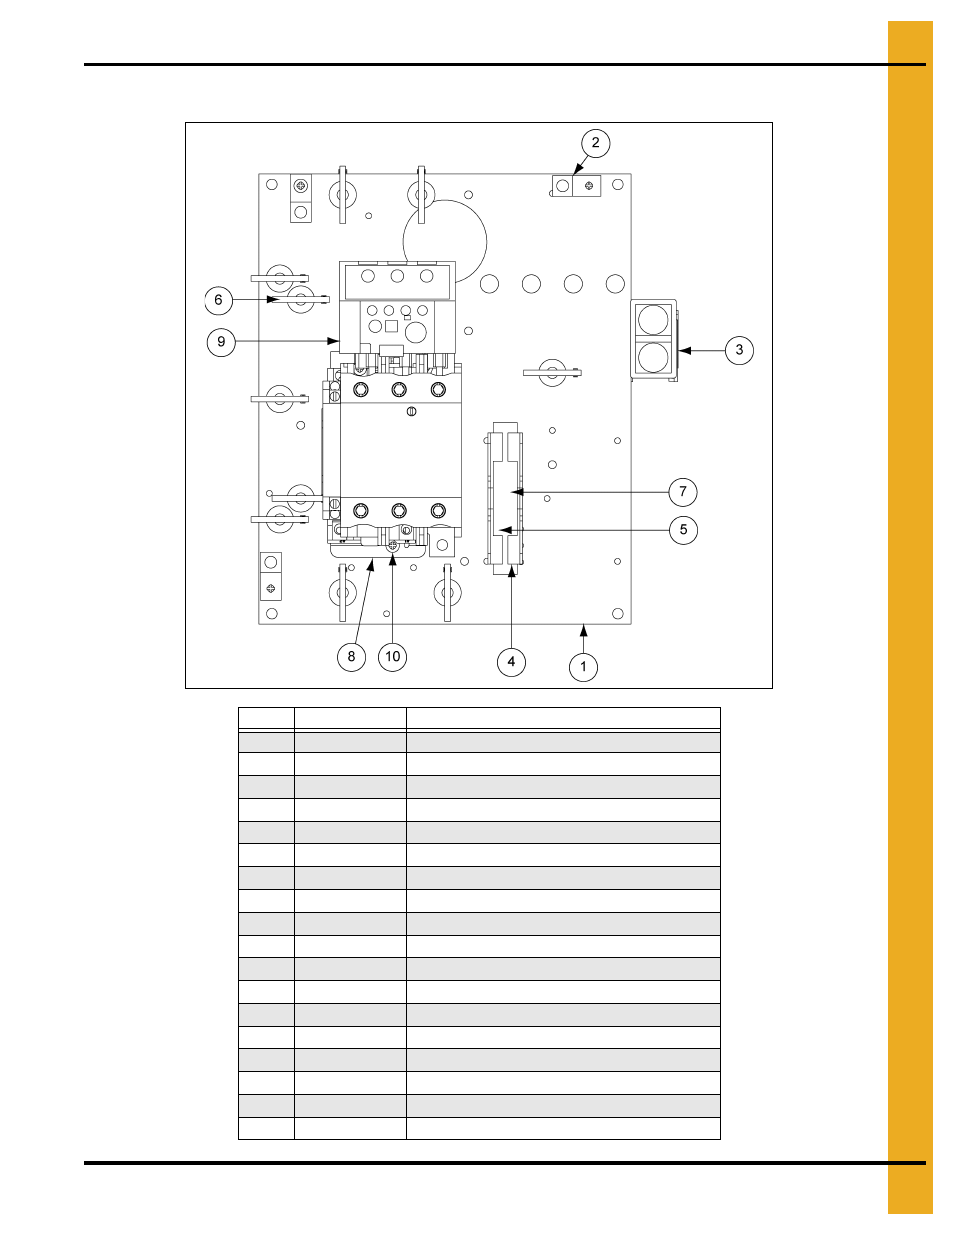 3 Phase 230 Volt Wiring Diagram And Parts Wiring Diagrams Grain Systems Pneg 010 User Manual Page 33 40